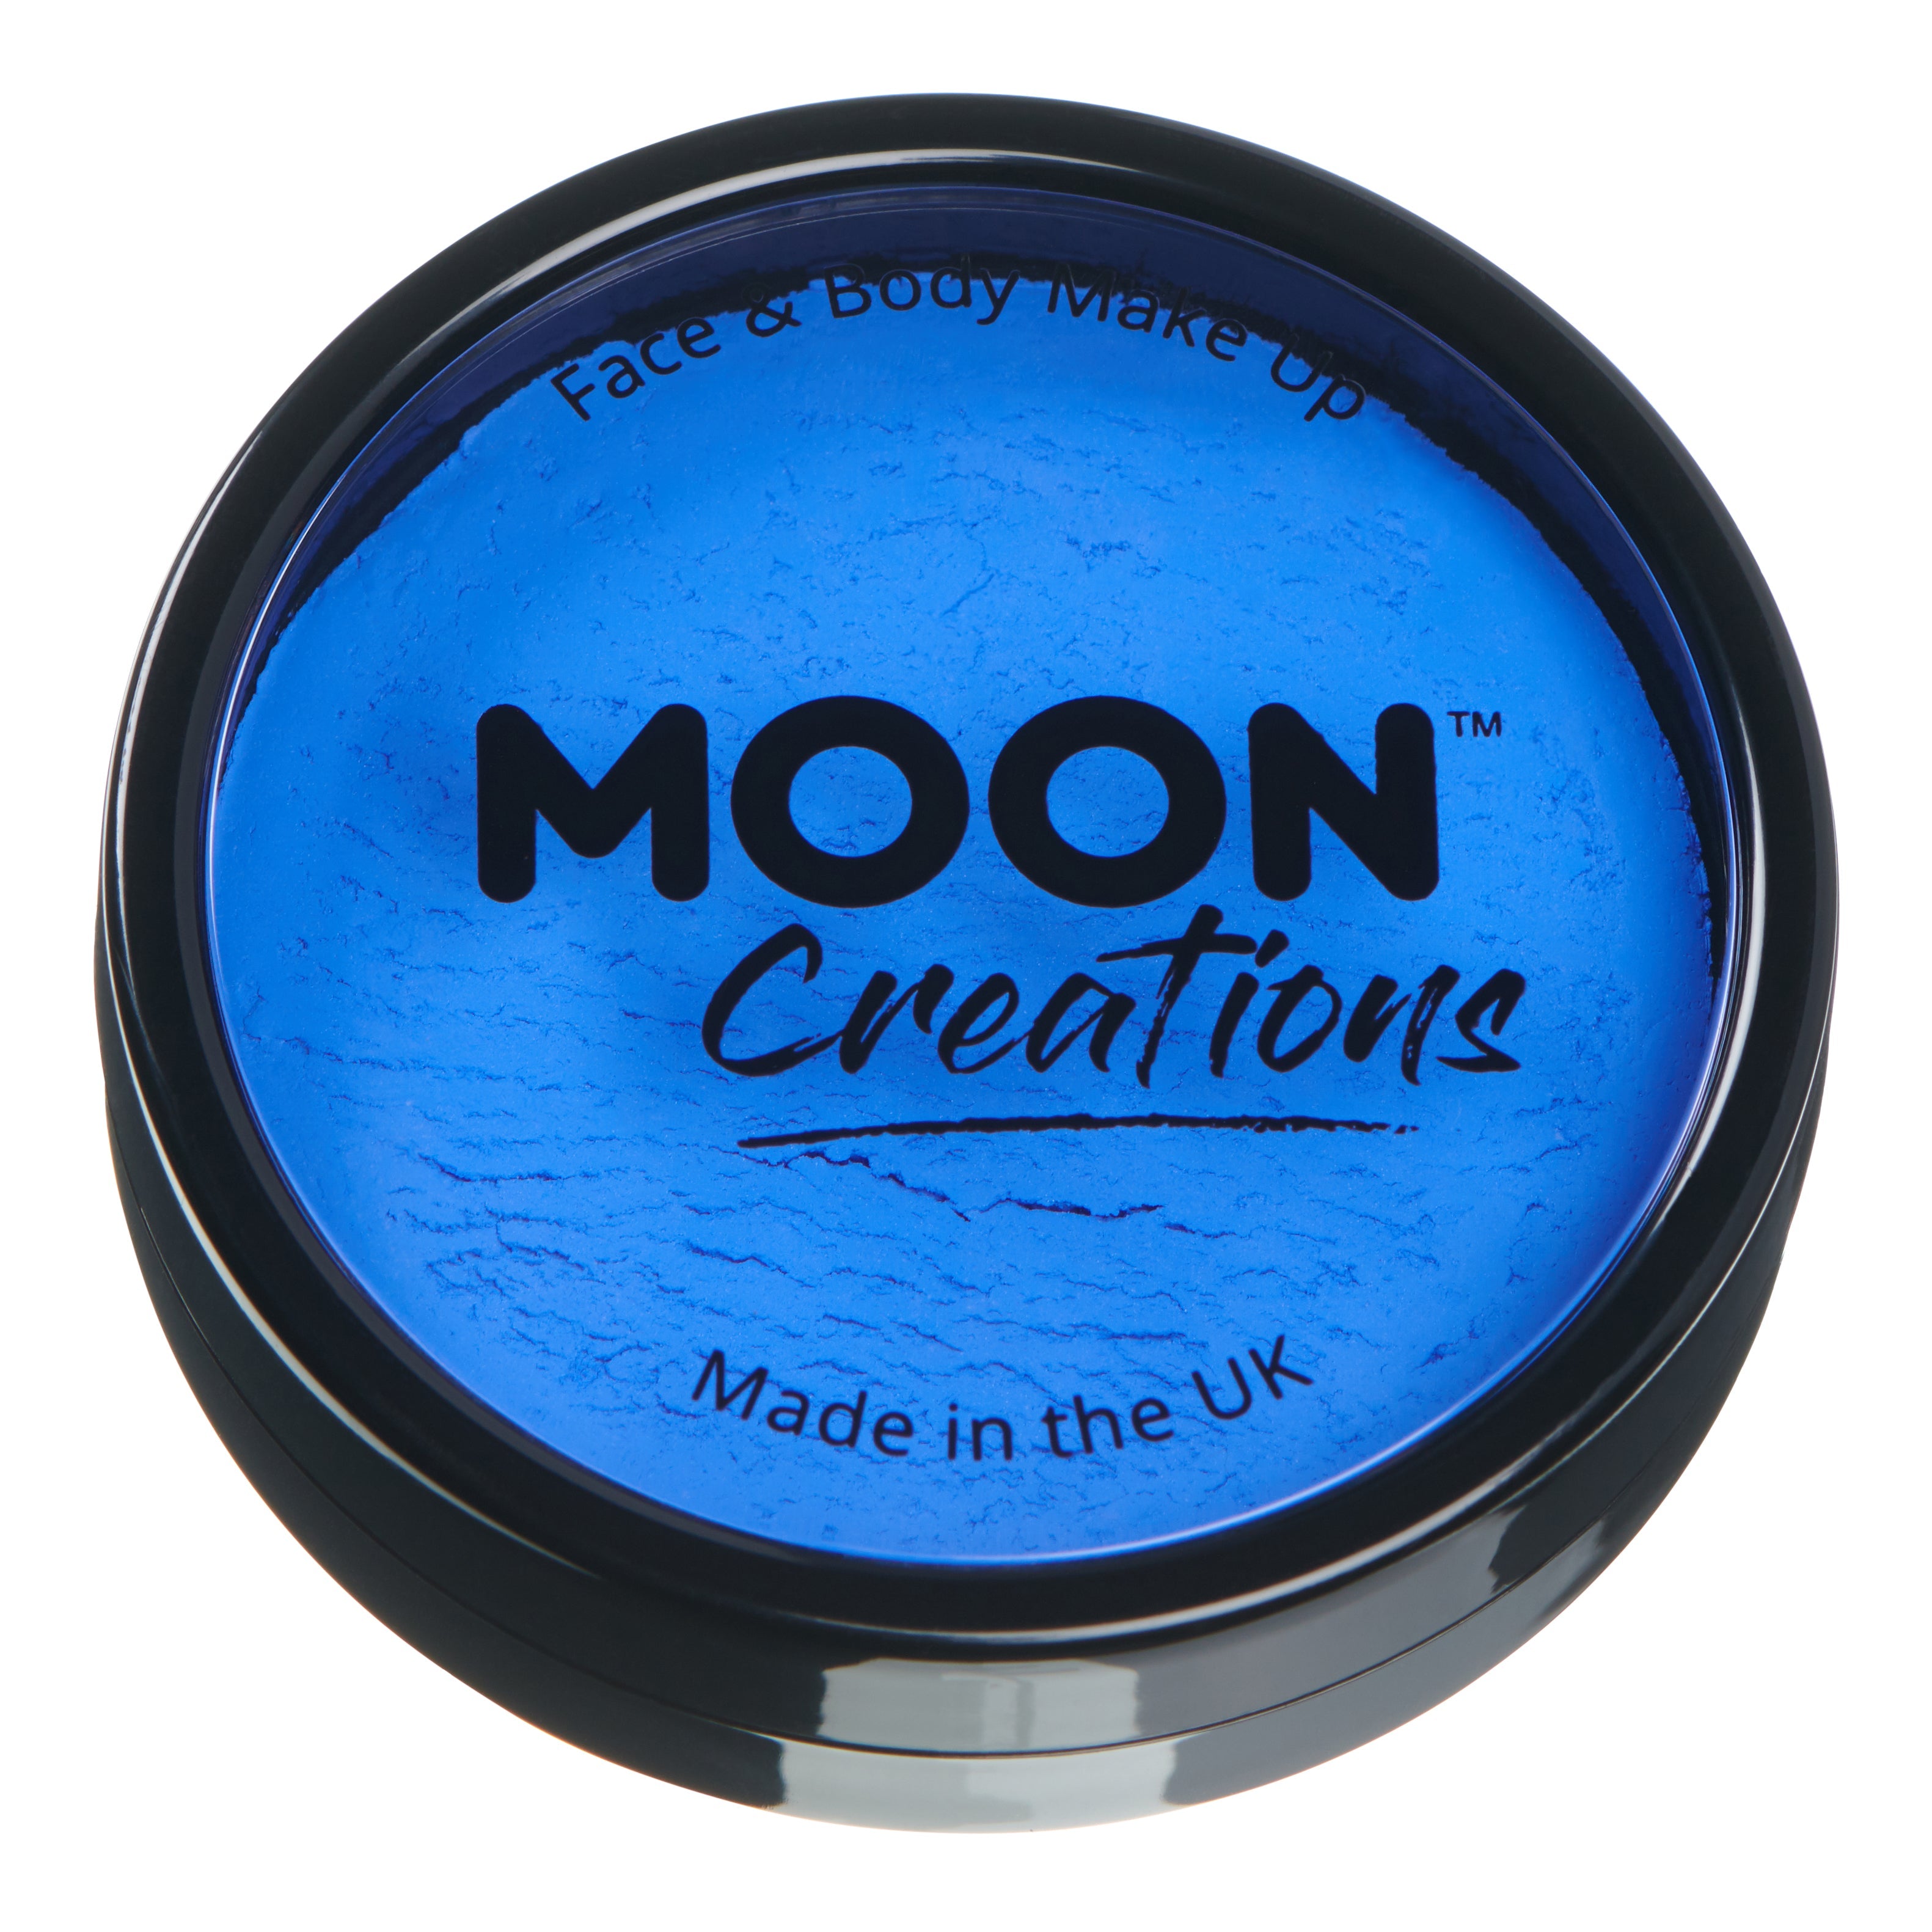 Royal Blue - Pro Professional Face Paint, 36g. Cosmetically certified, FDA & Health Canada compliant, cruelty free and vegan.